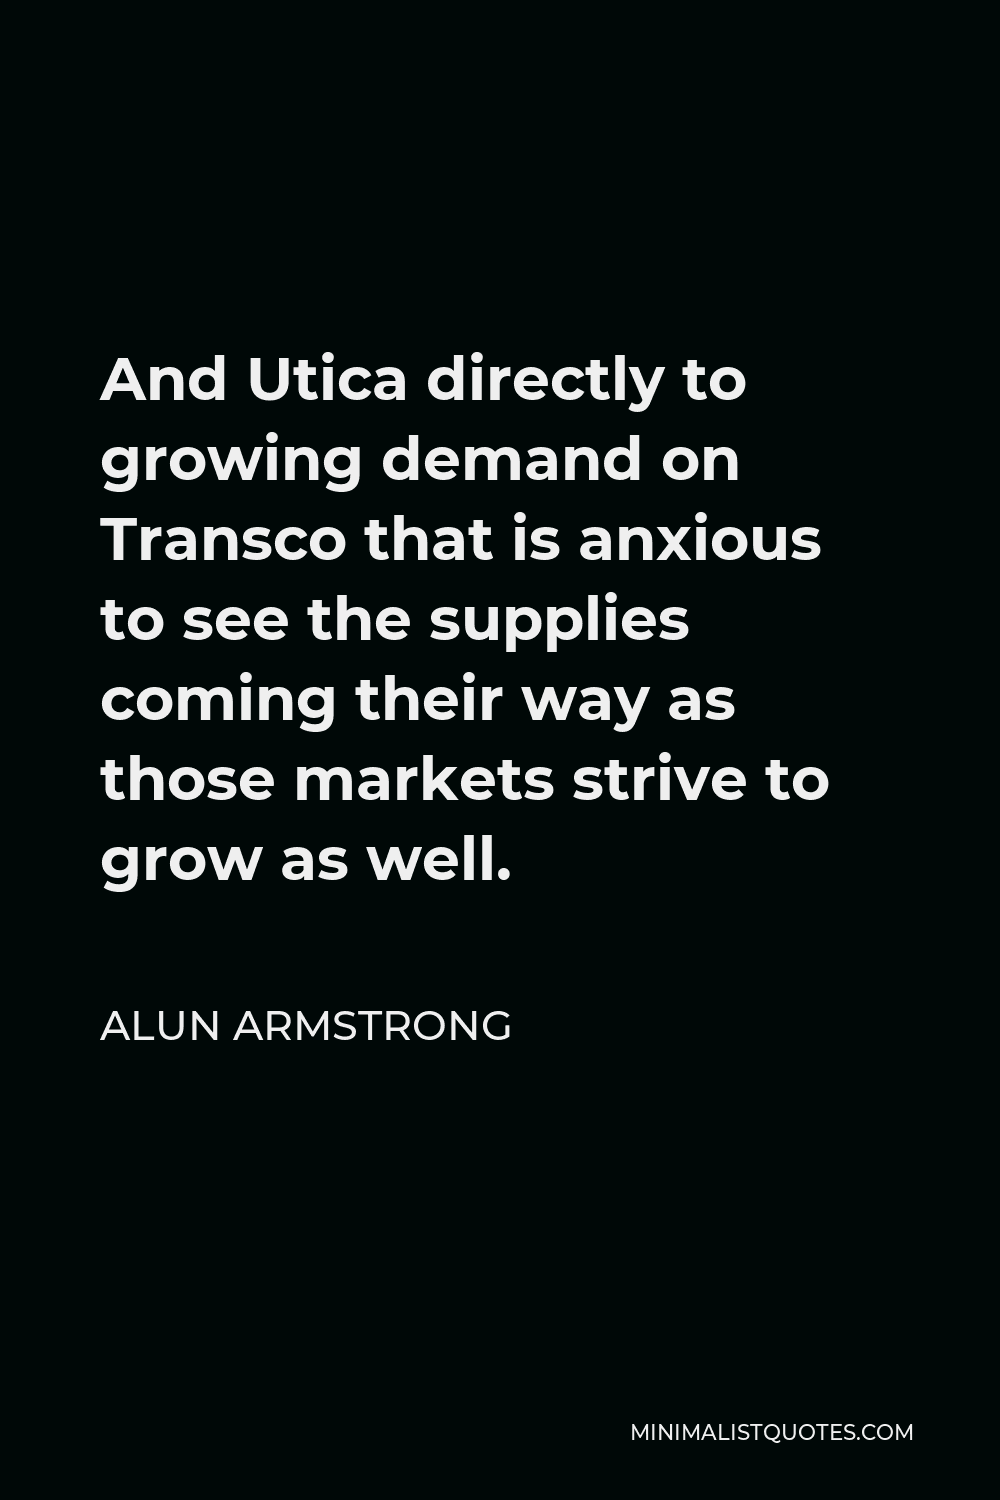 Alun Armstrong Quote - And Utica directly to growing demand on Transco that is anxious to see the supplies coming their way as those markets strive to grow as well.